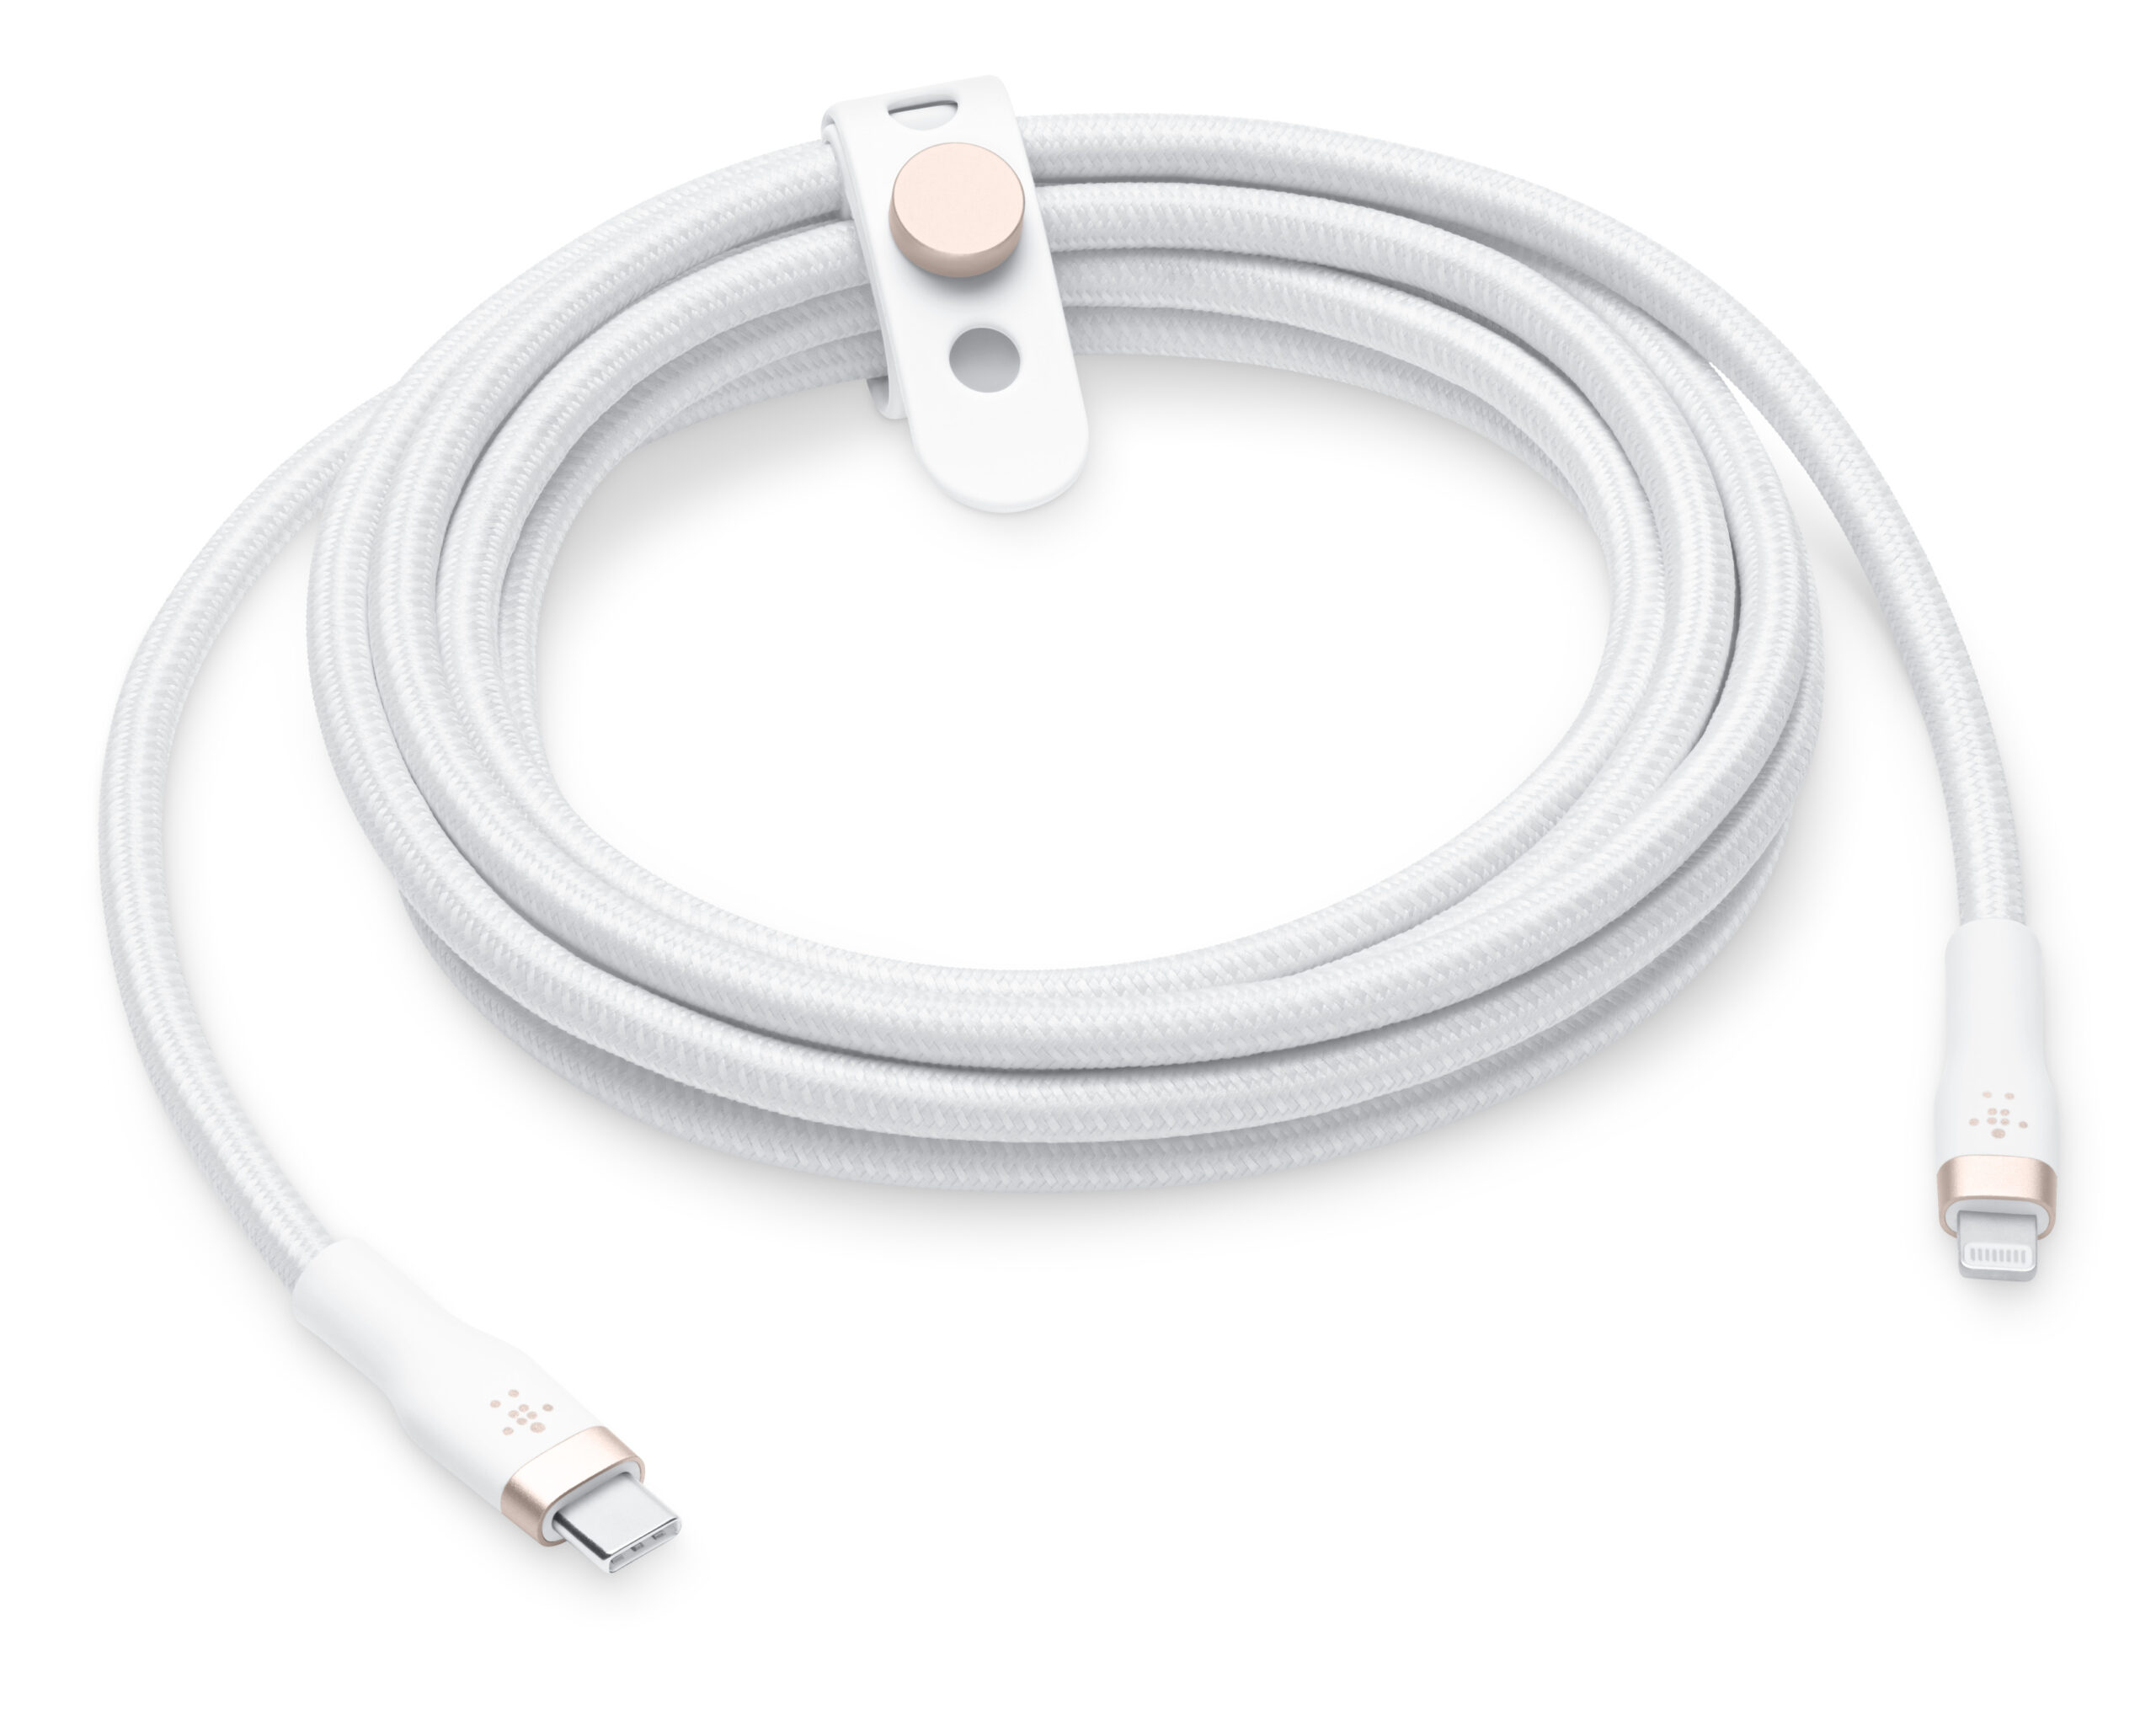 Belkin Boost Charge Lightning Cable: